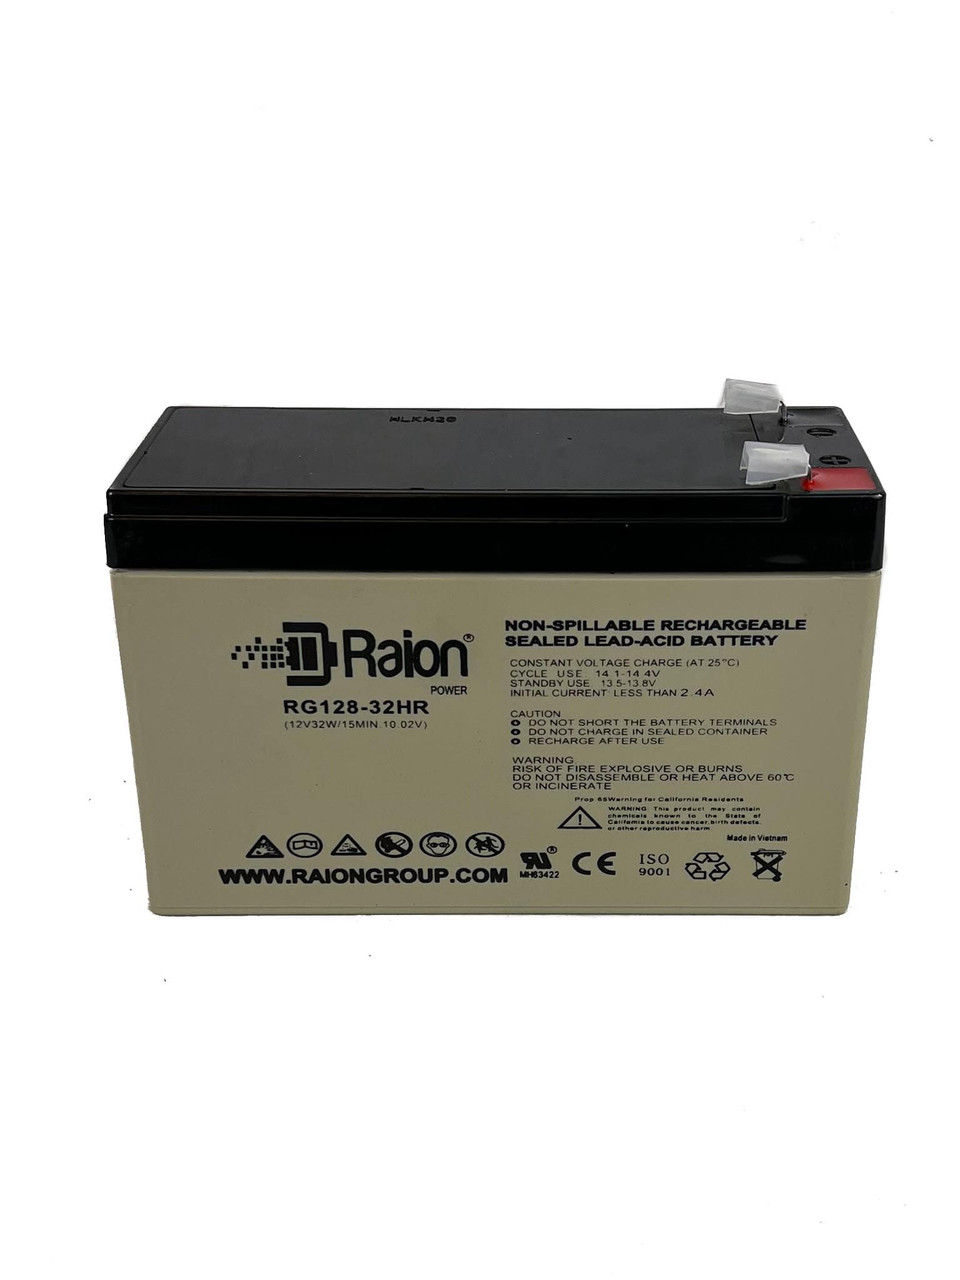 Raion Power RG128-32HR Replacement High Rate Battery Cartridge for APC BACKUPS BK500